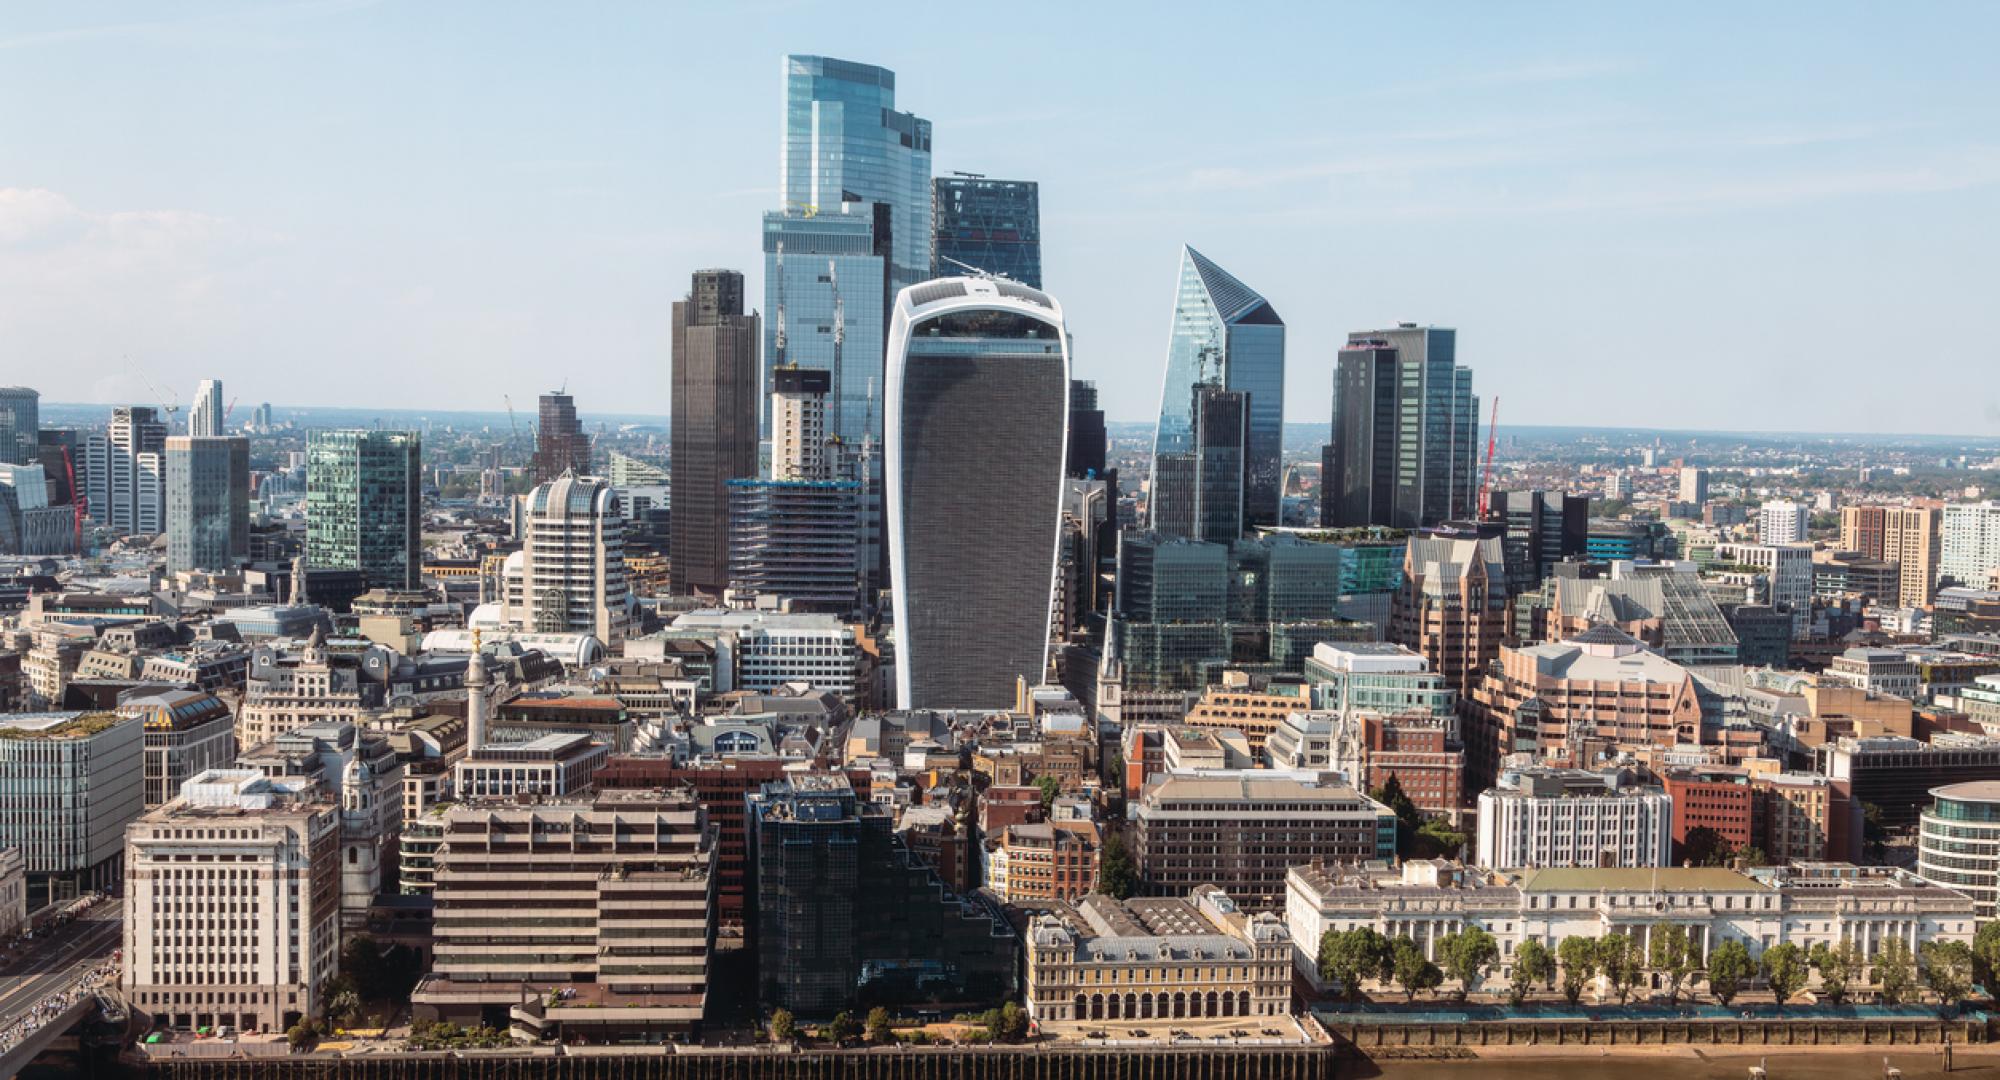 Aerial Vista of London's Financial District